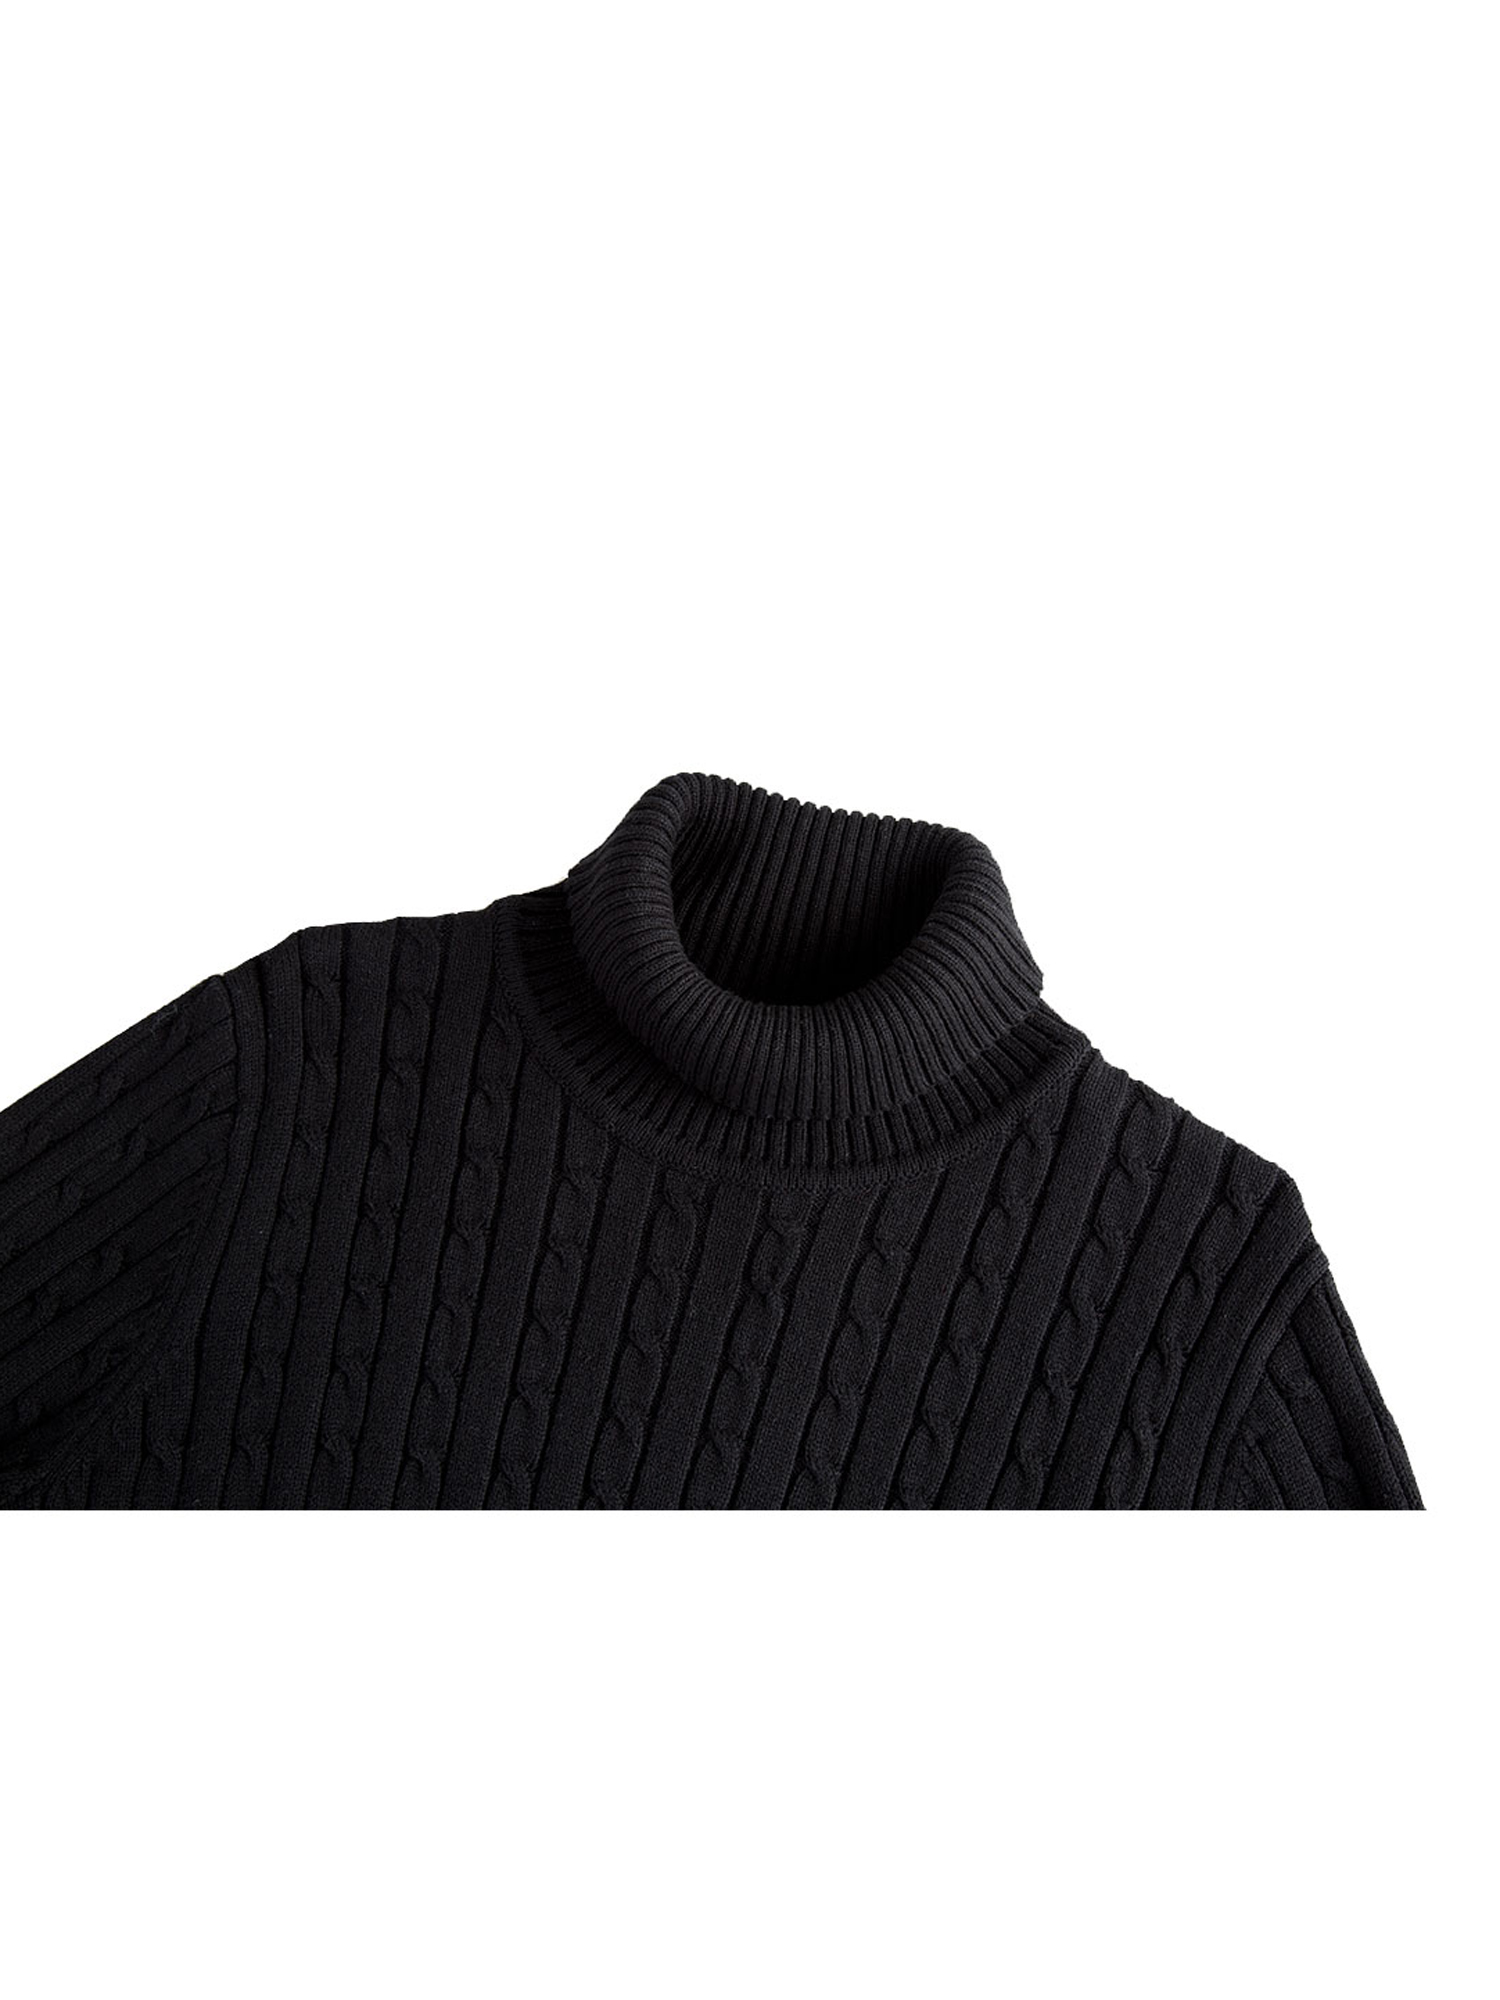 Men's Turtleneck Long Sleeves Pullover Cable Knit Sweater - image 4 of 7